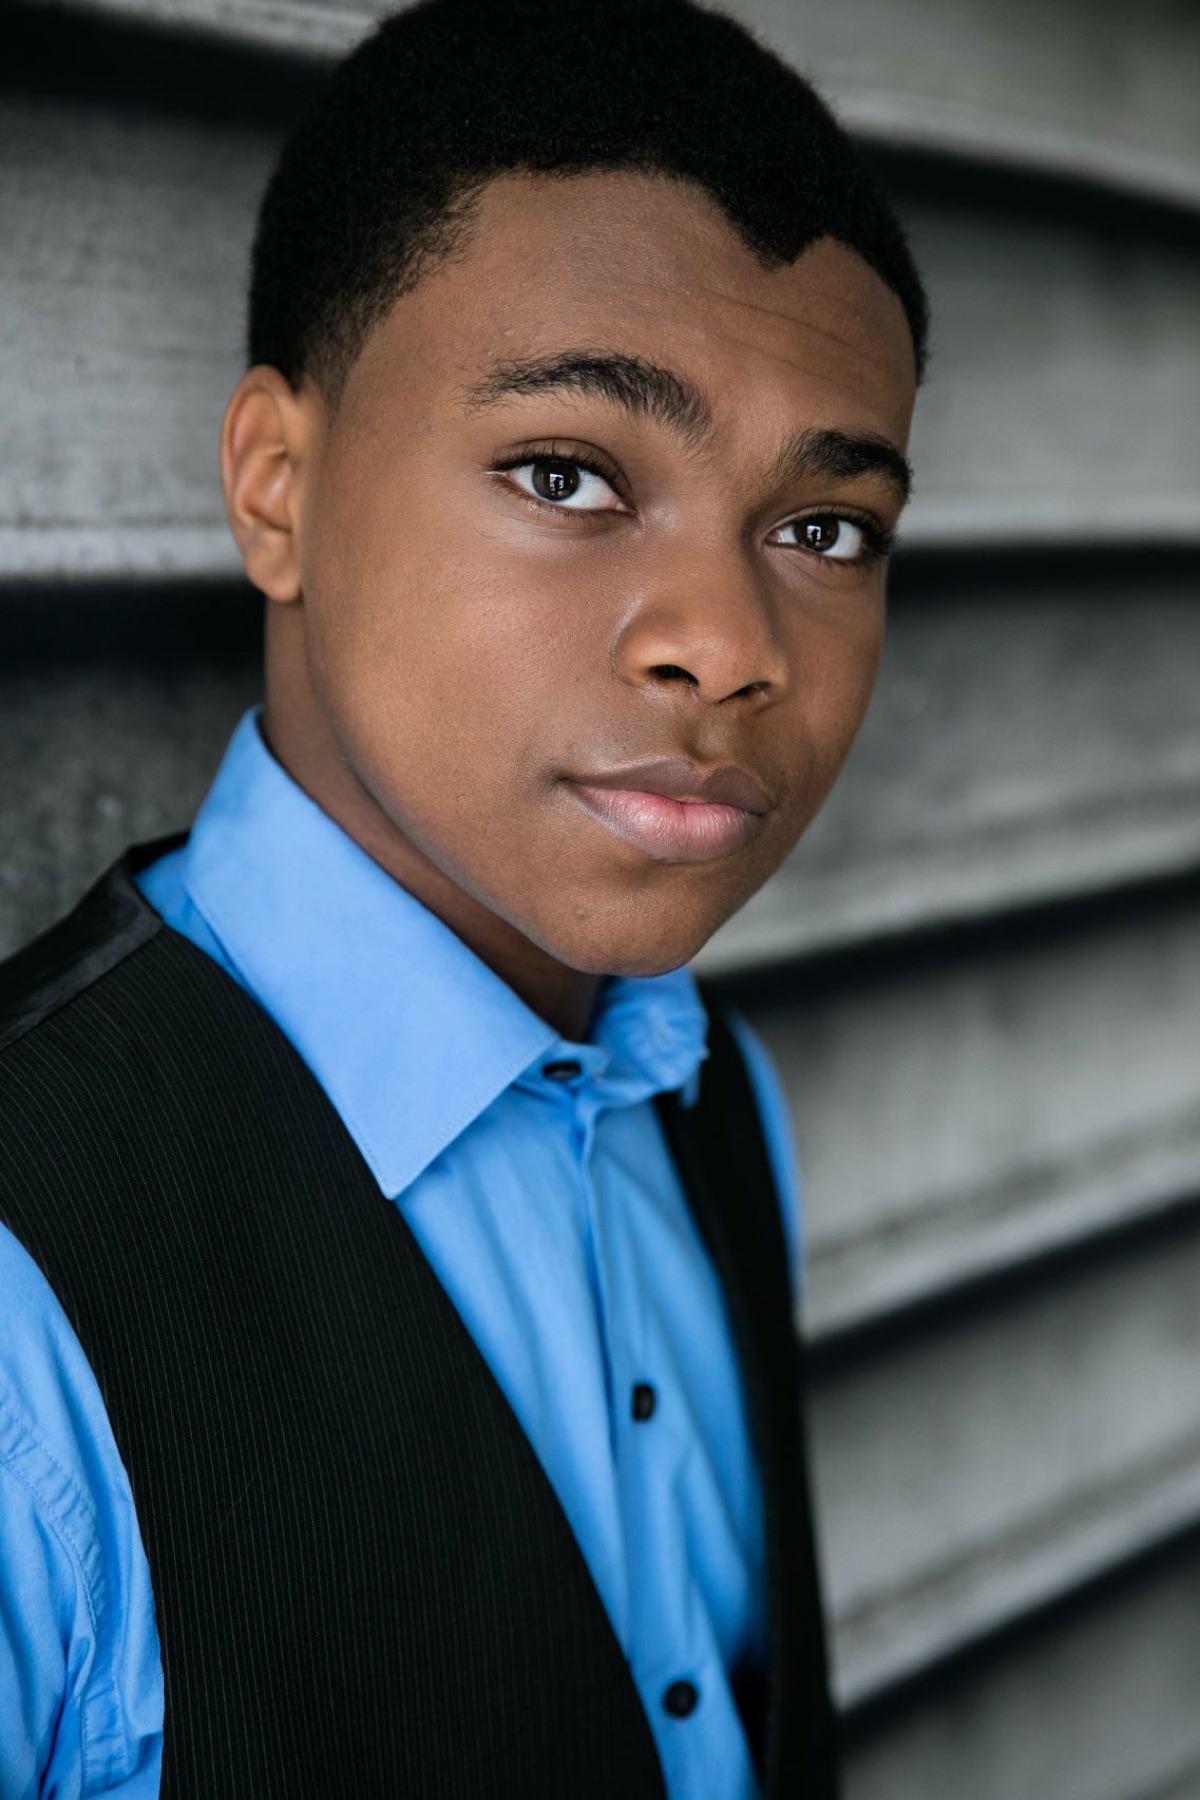 Chase uses the name “Chase Alexander” as his professional acting name.